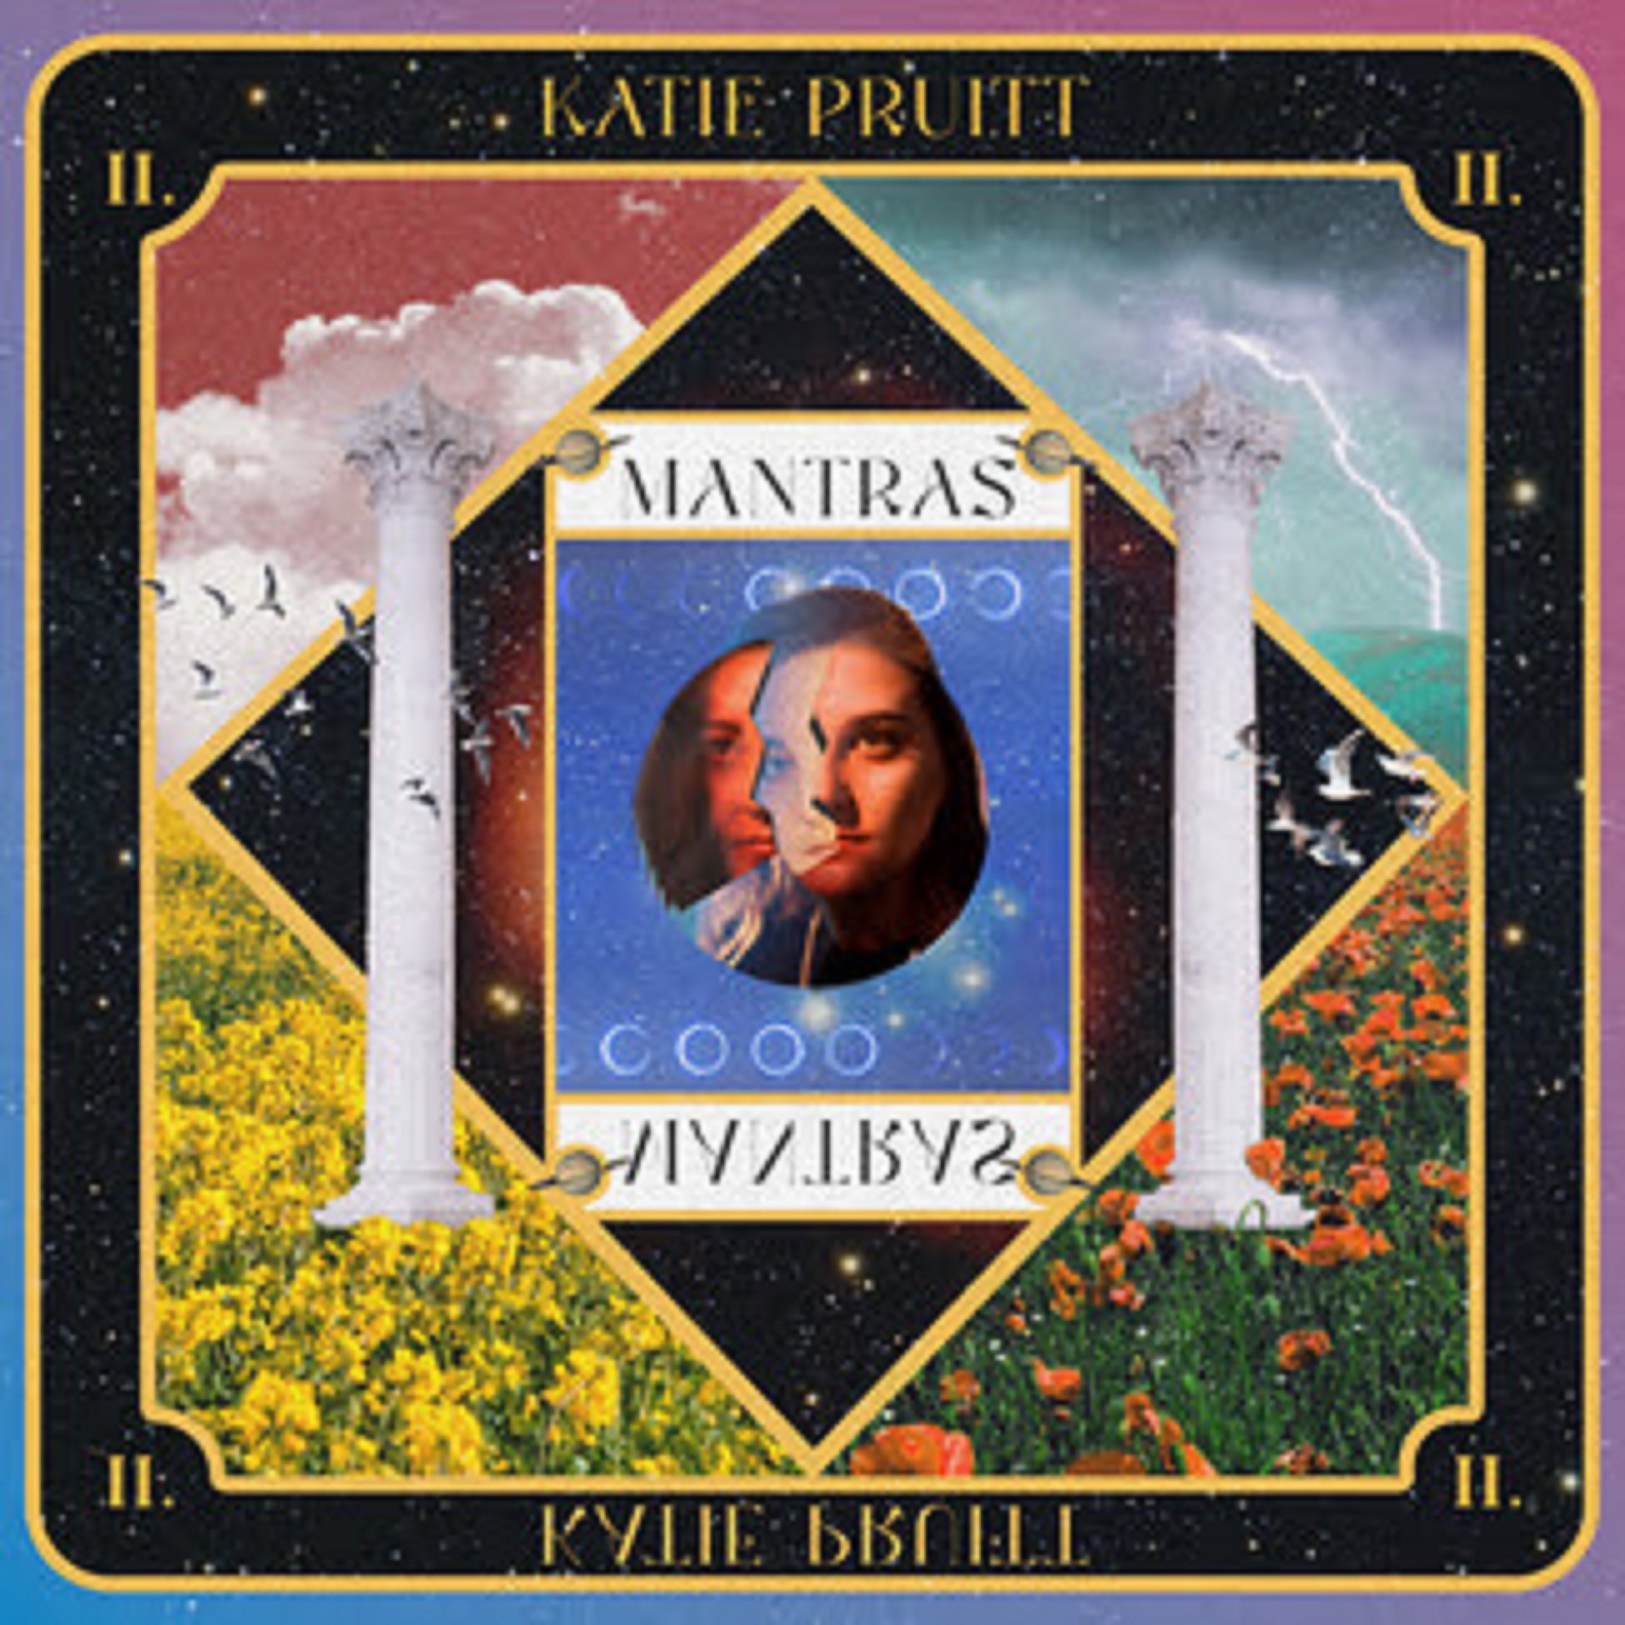 Katie Pruitt’s new album "Mantras" out today via Rounder Records